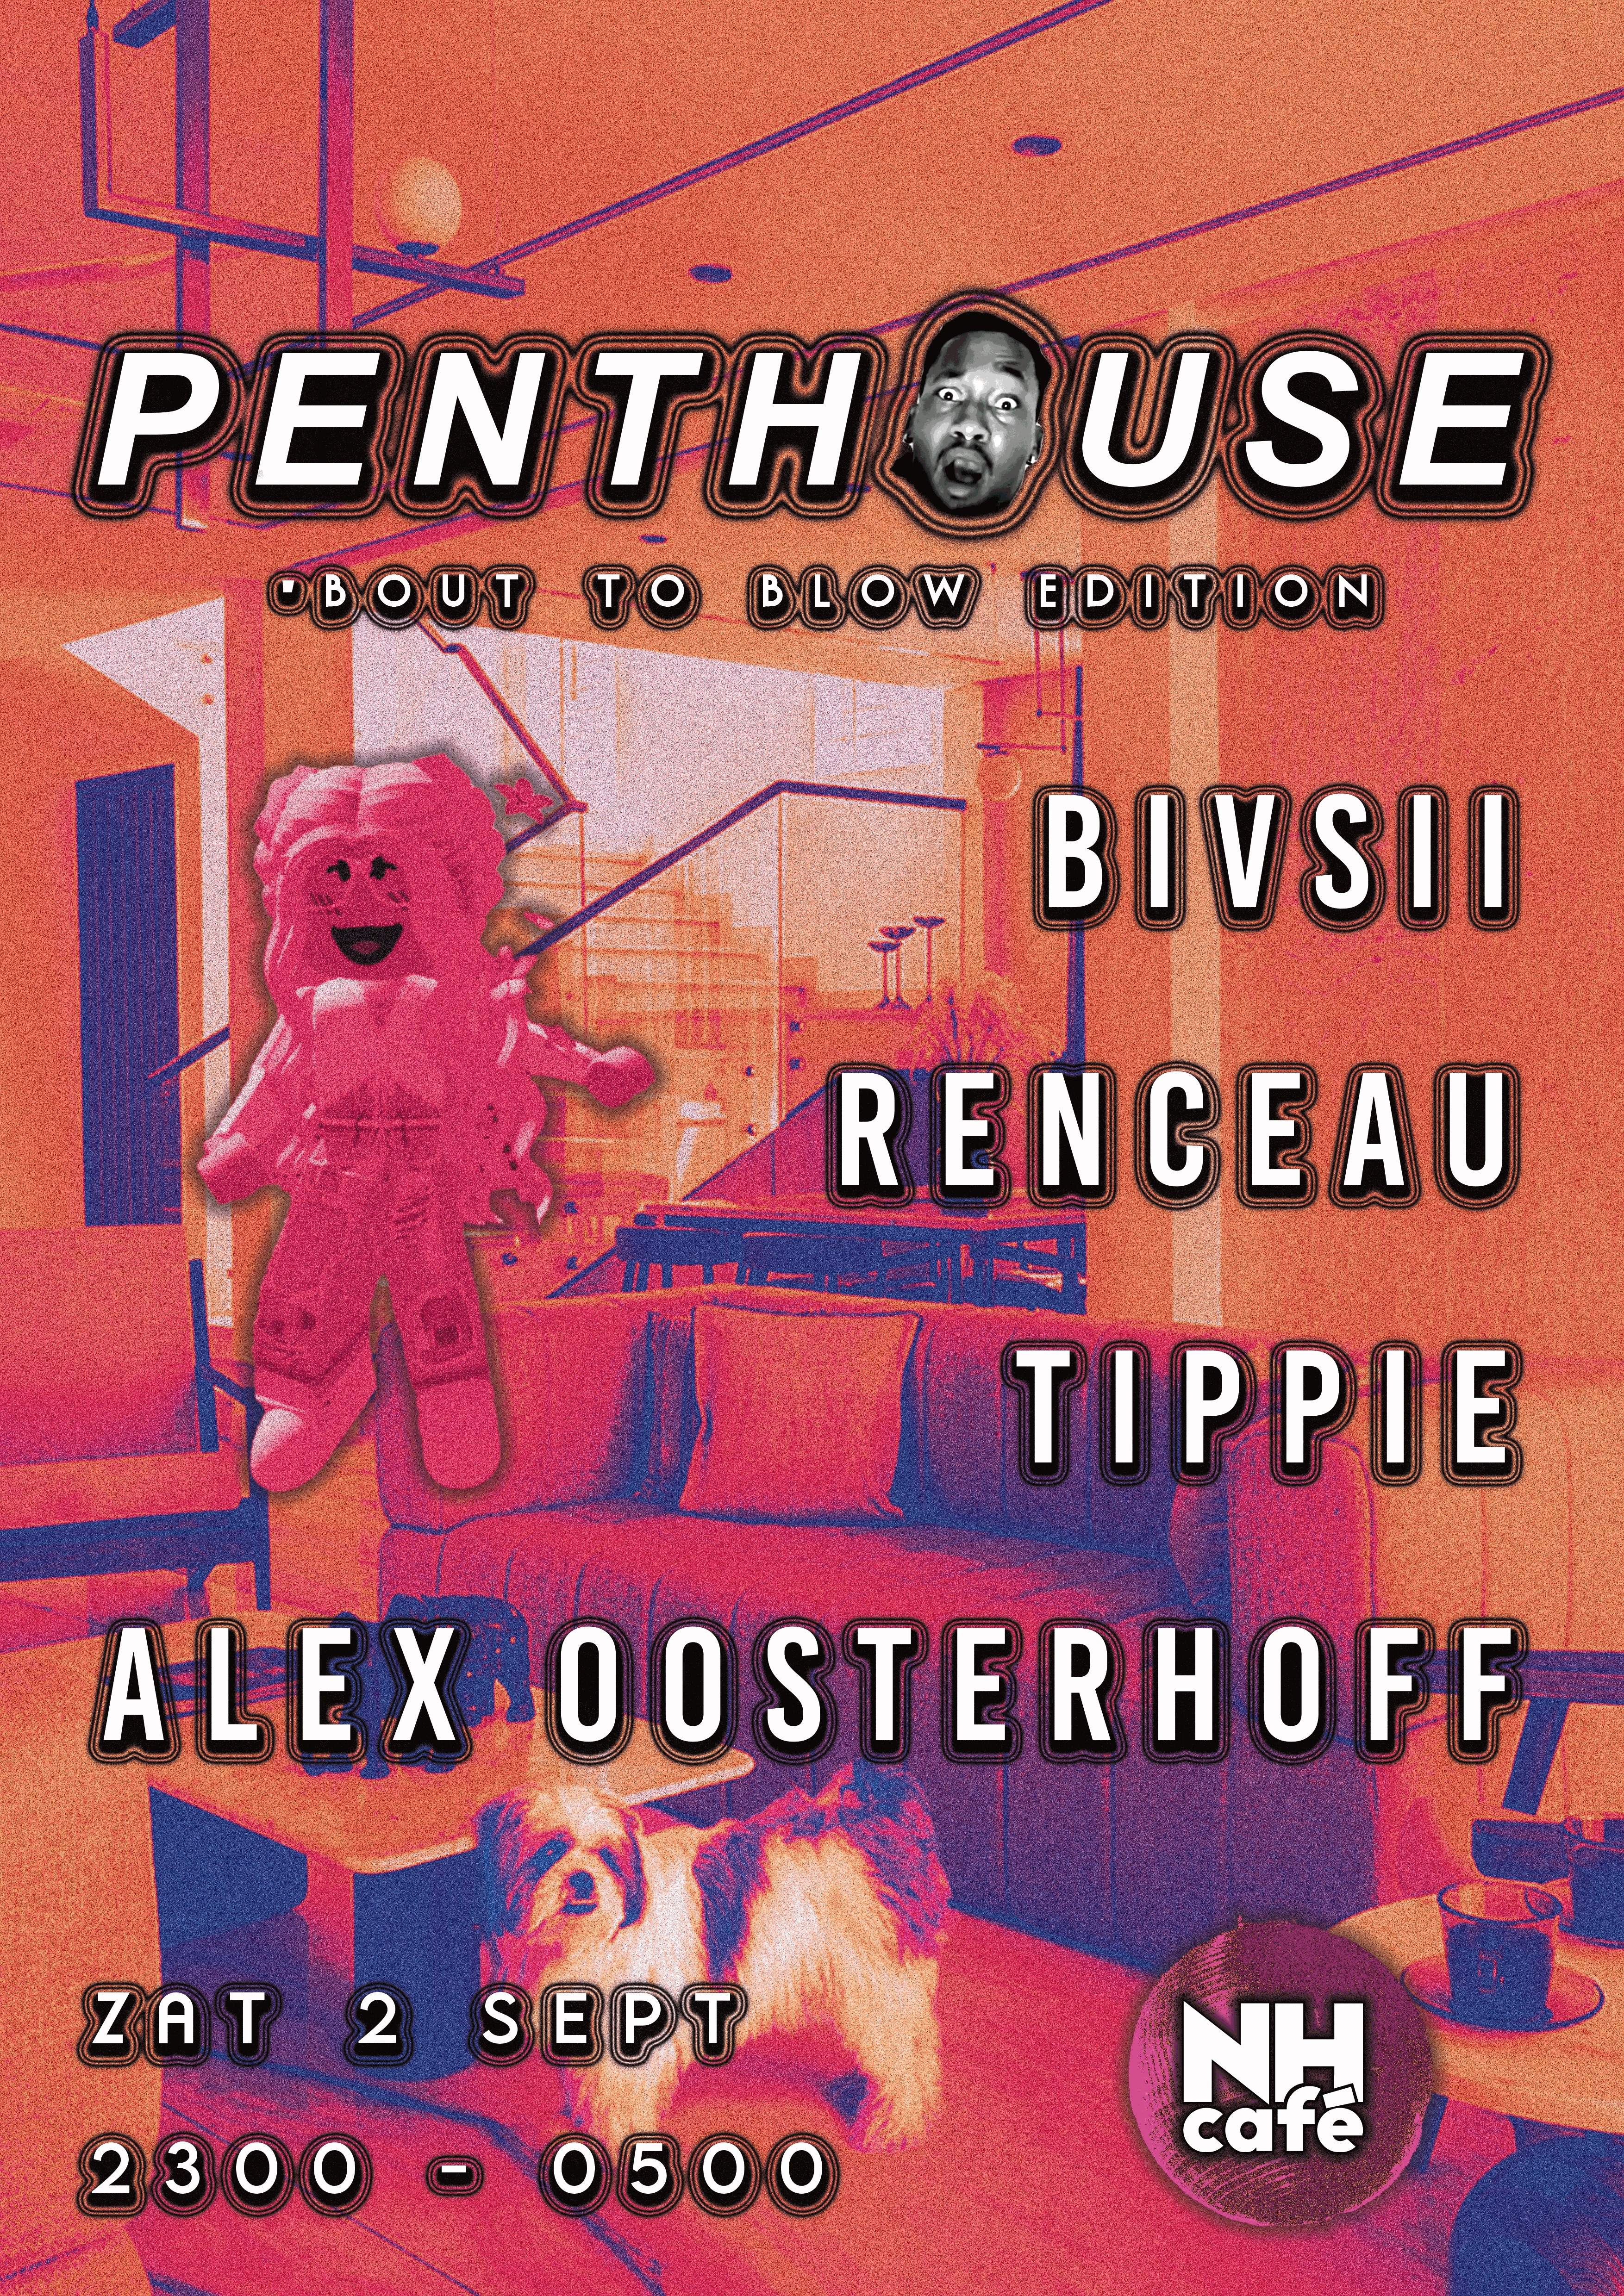 Penthouse - 'Bout To Blow Edition - Página frontal